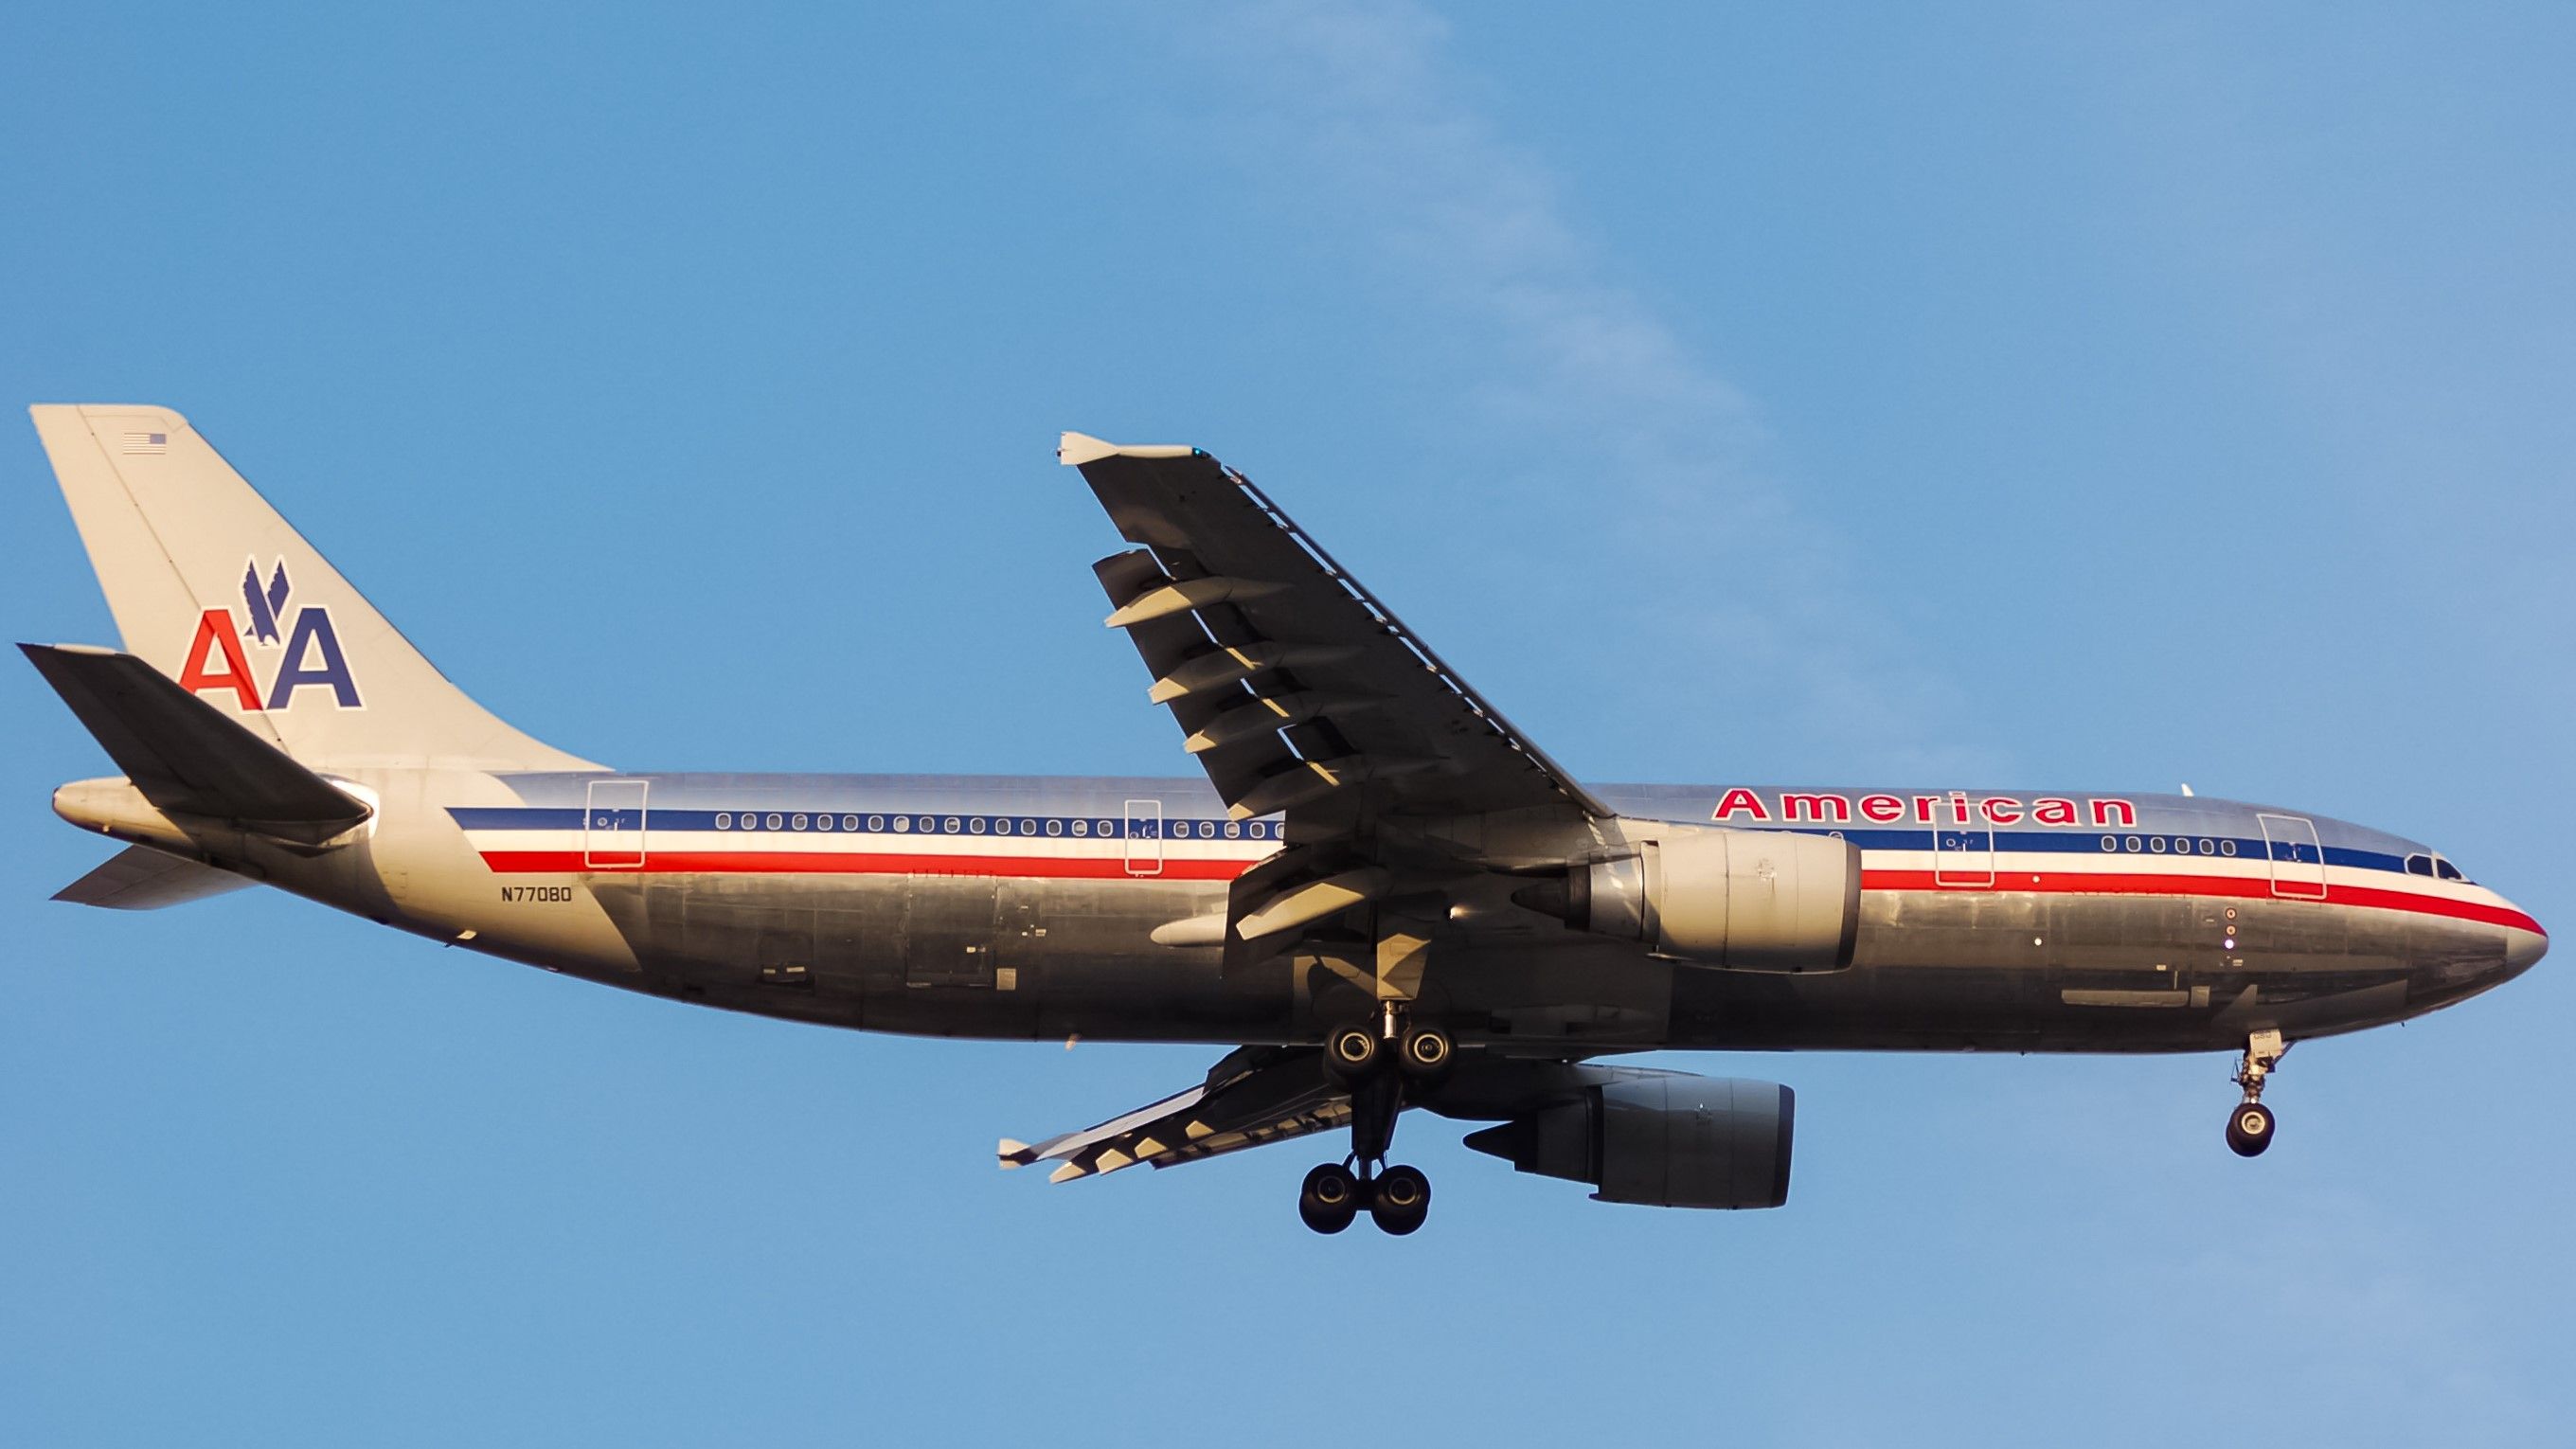 American Airlines Airbus A300 Landing At New York JFK